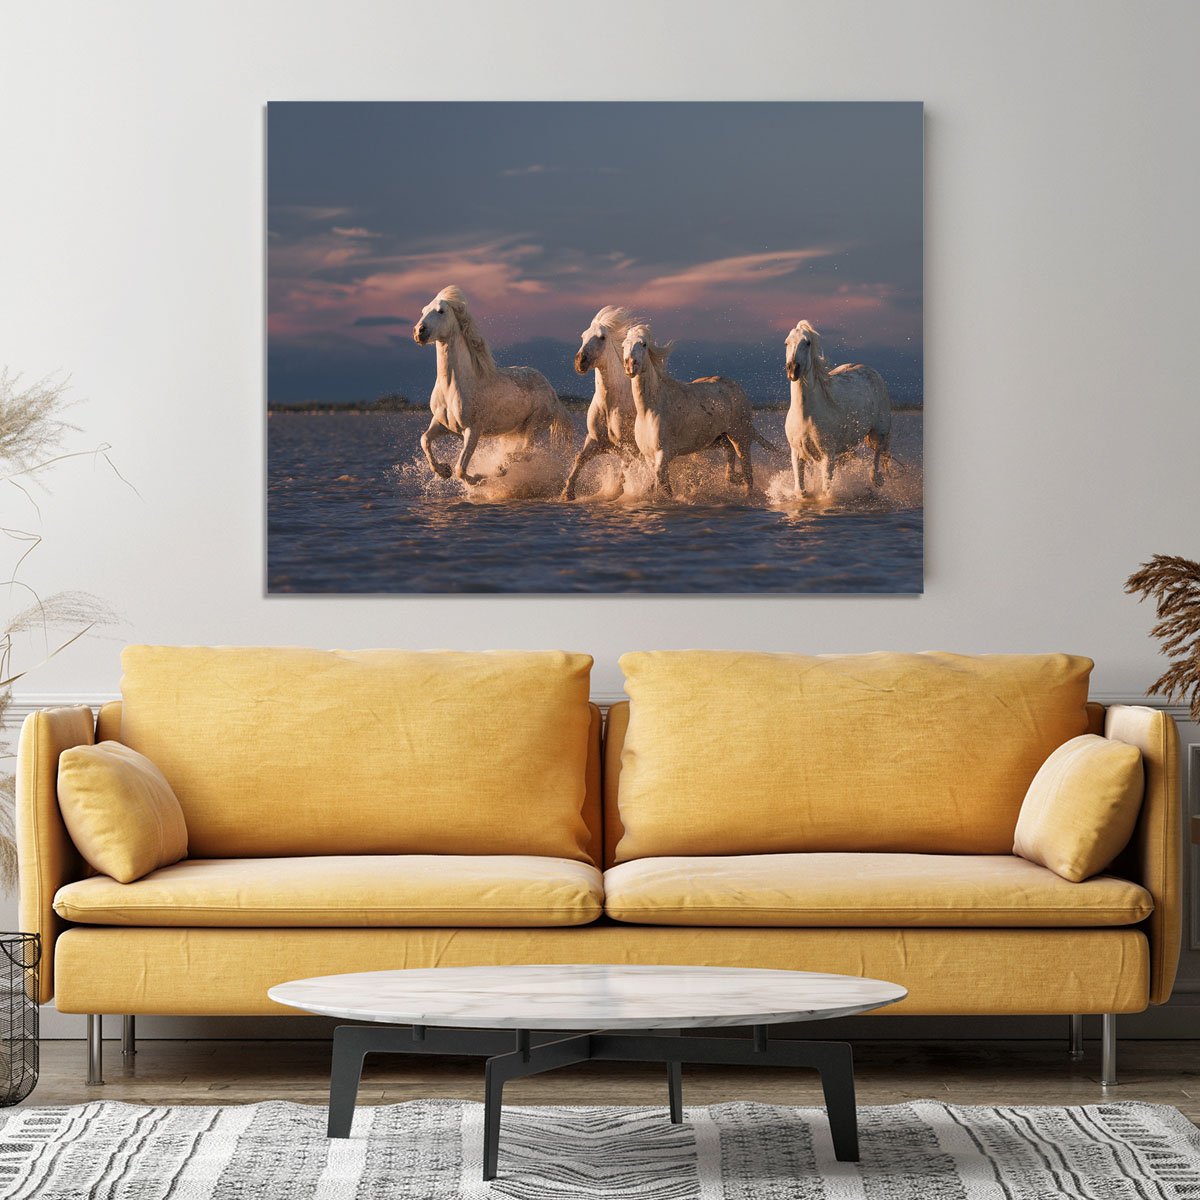 Wite Horses Running In Water 2 Canvas Print or Poster - Canvas Art Rocks - 4